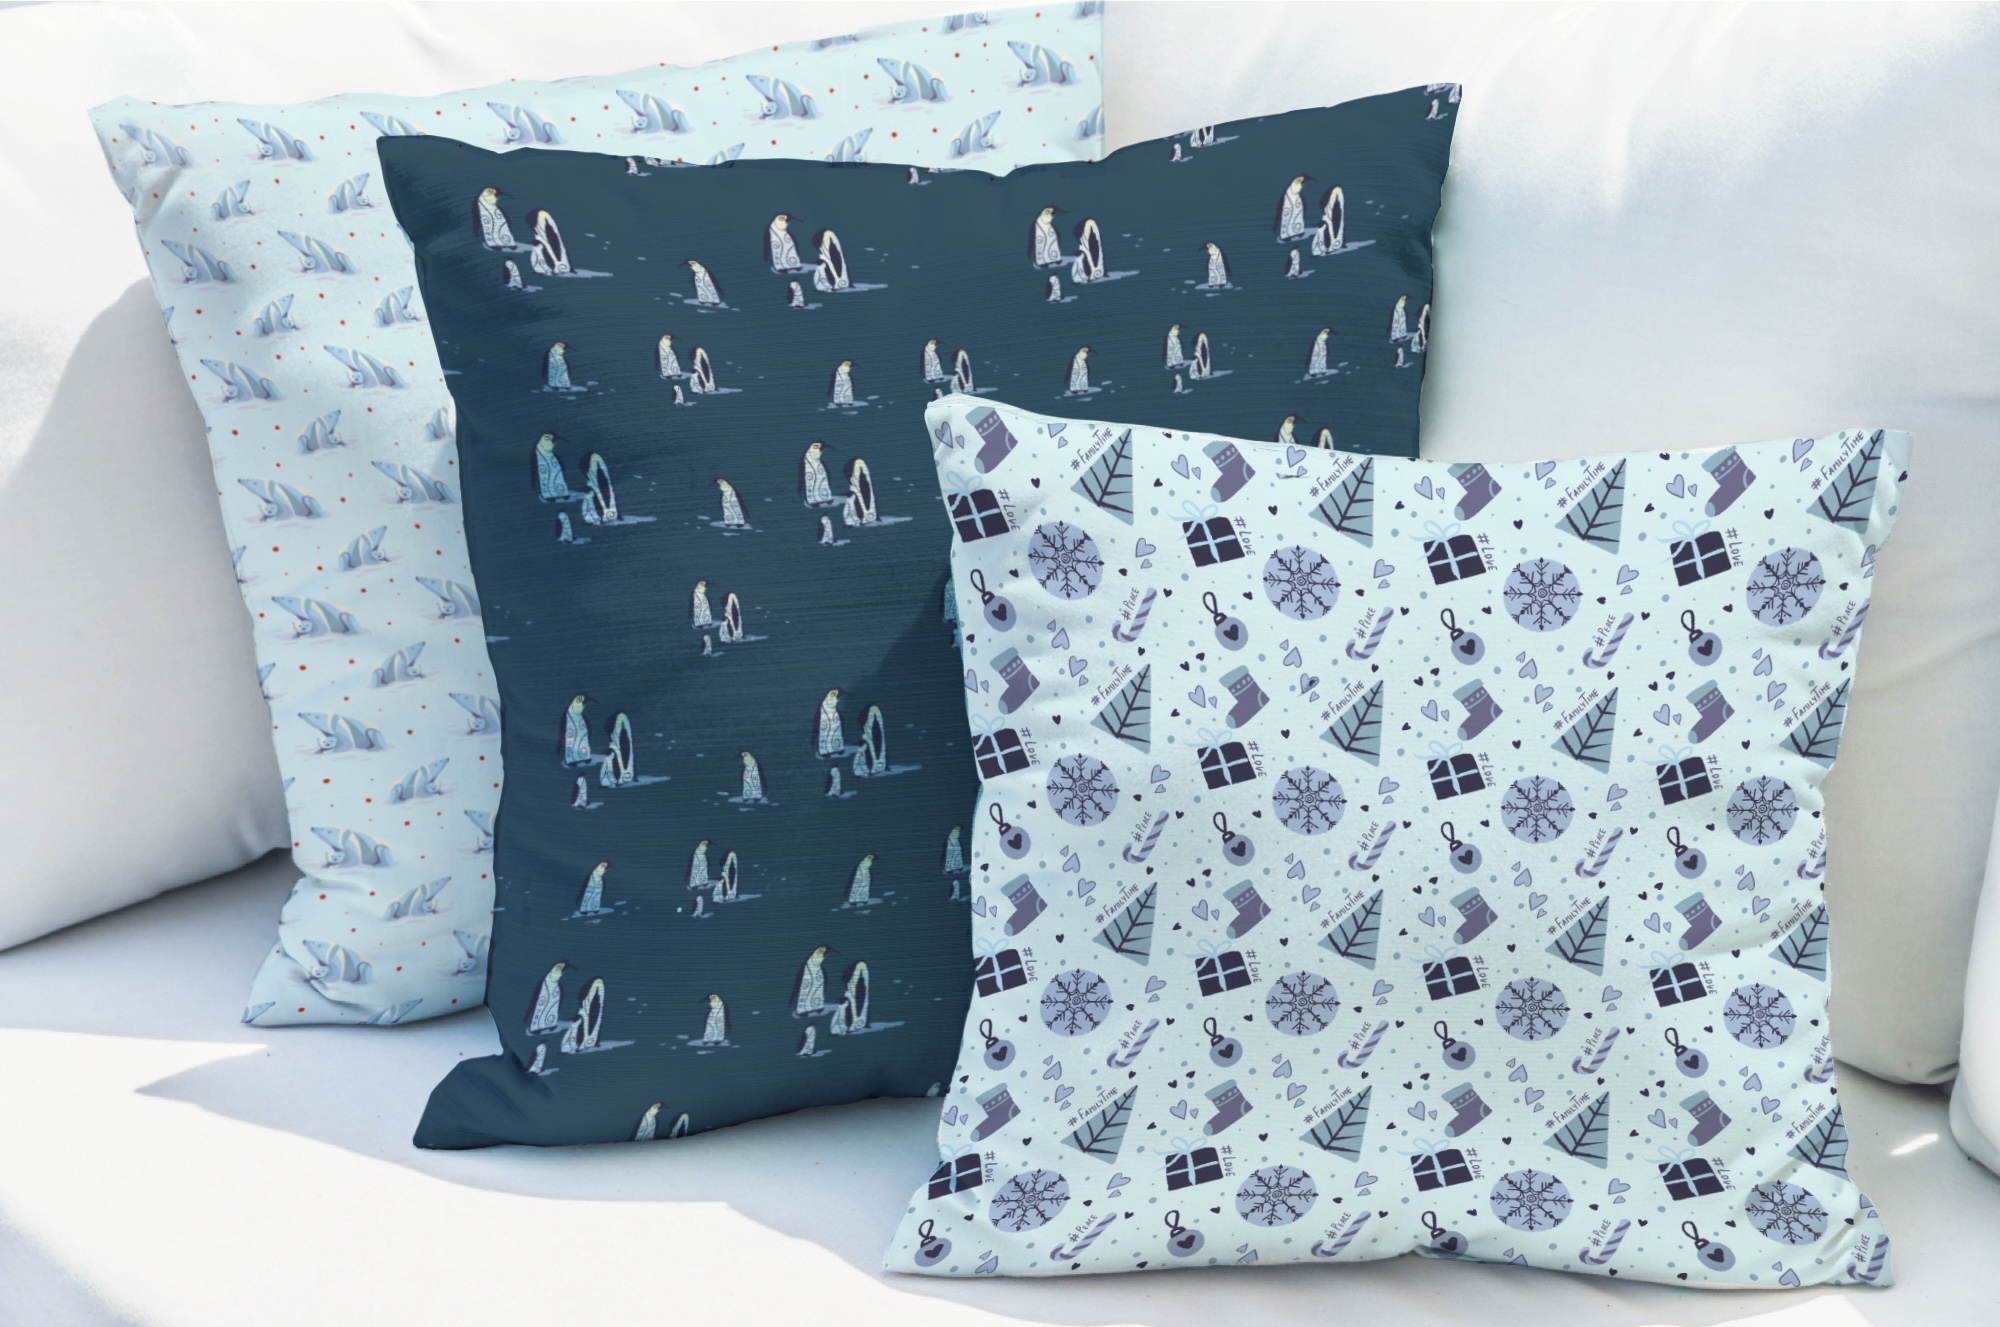 Winter Patterns and Christmas Cards, pillows mockup.